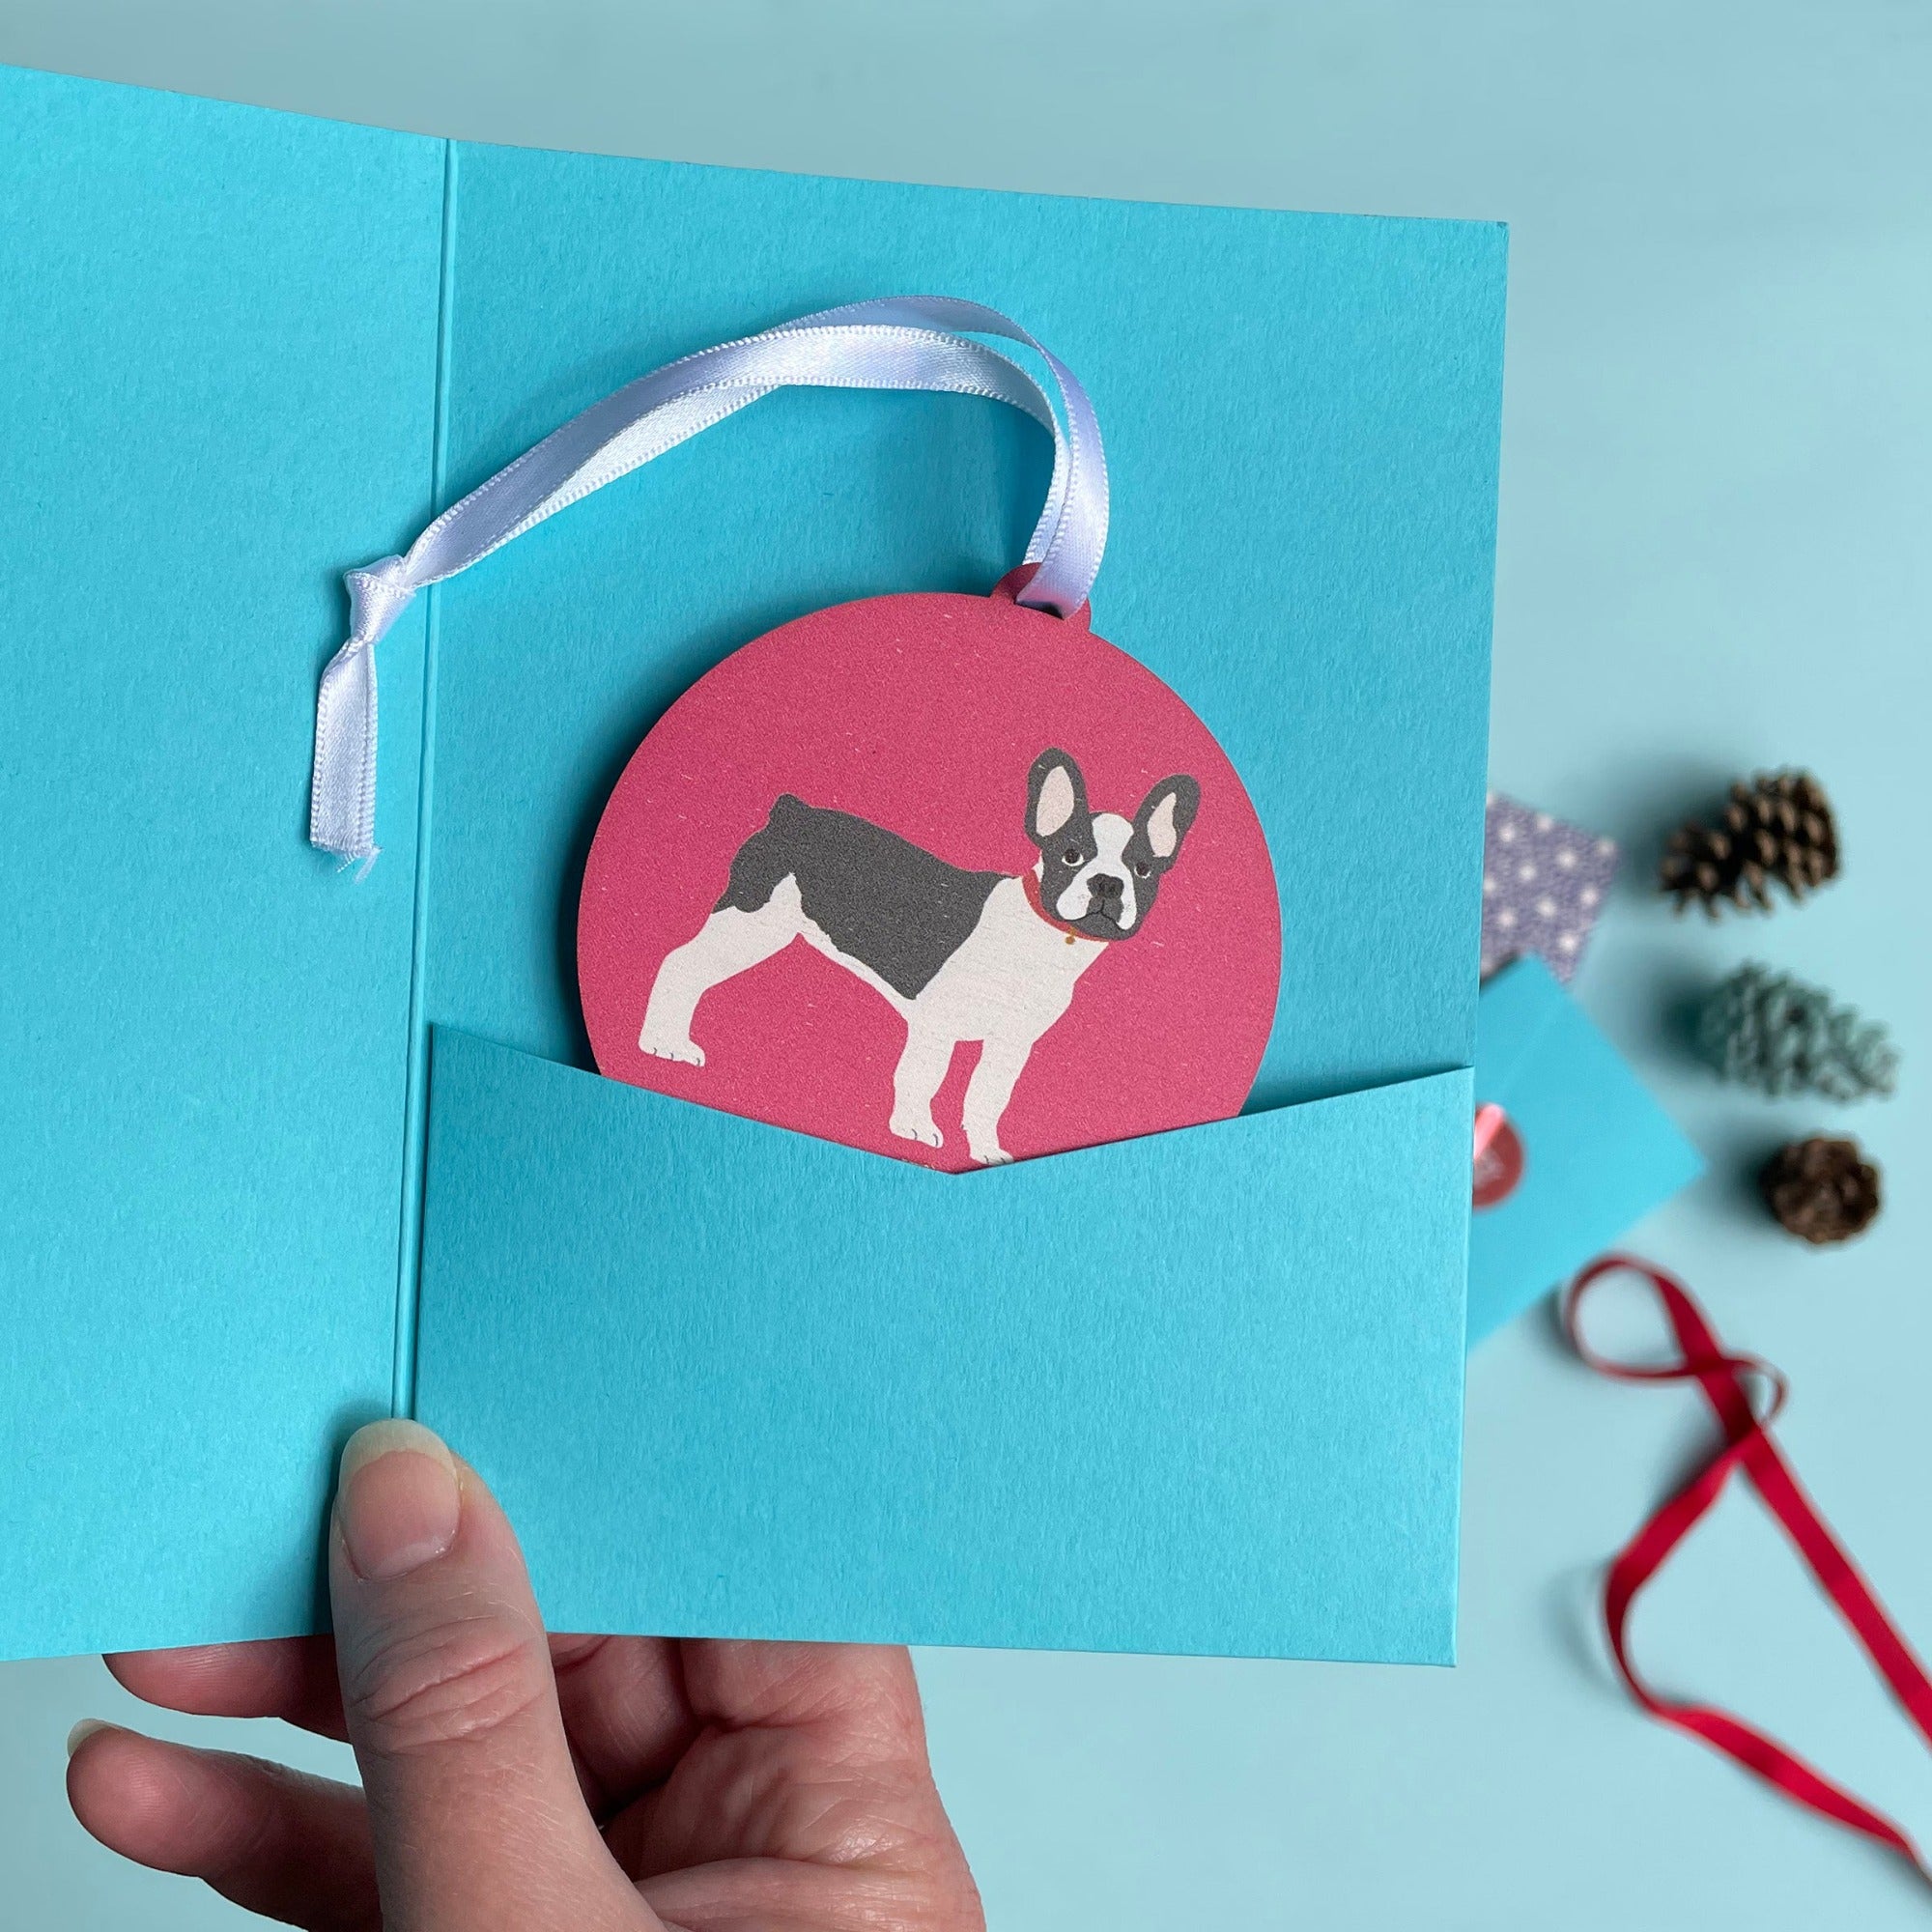 Painted wooden decoration of a french bulldog dog on a coloured background in a turquoise gift sleeve